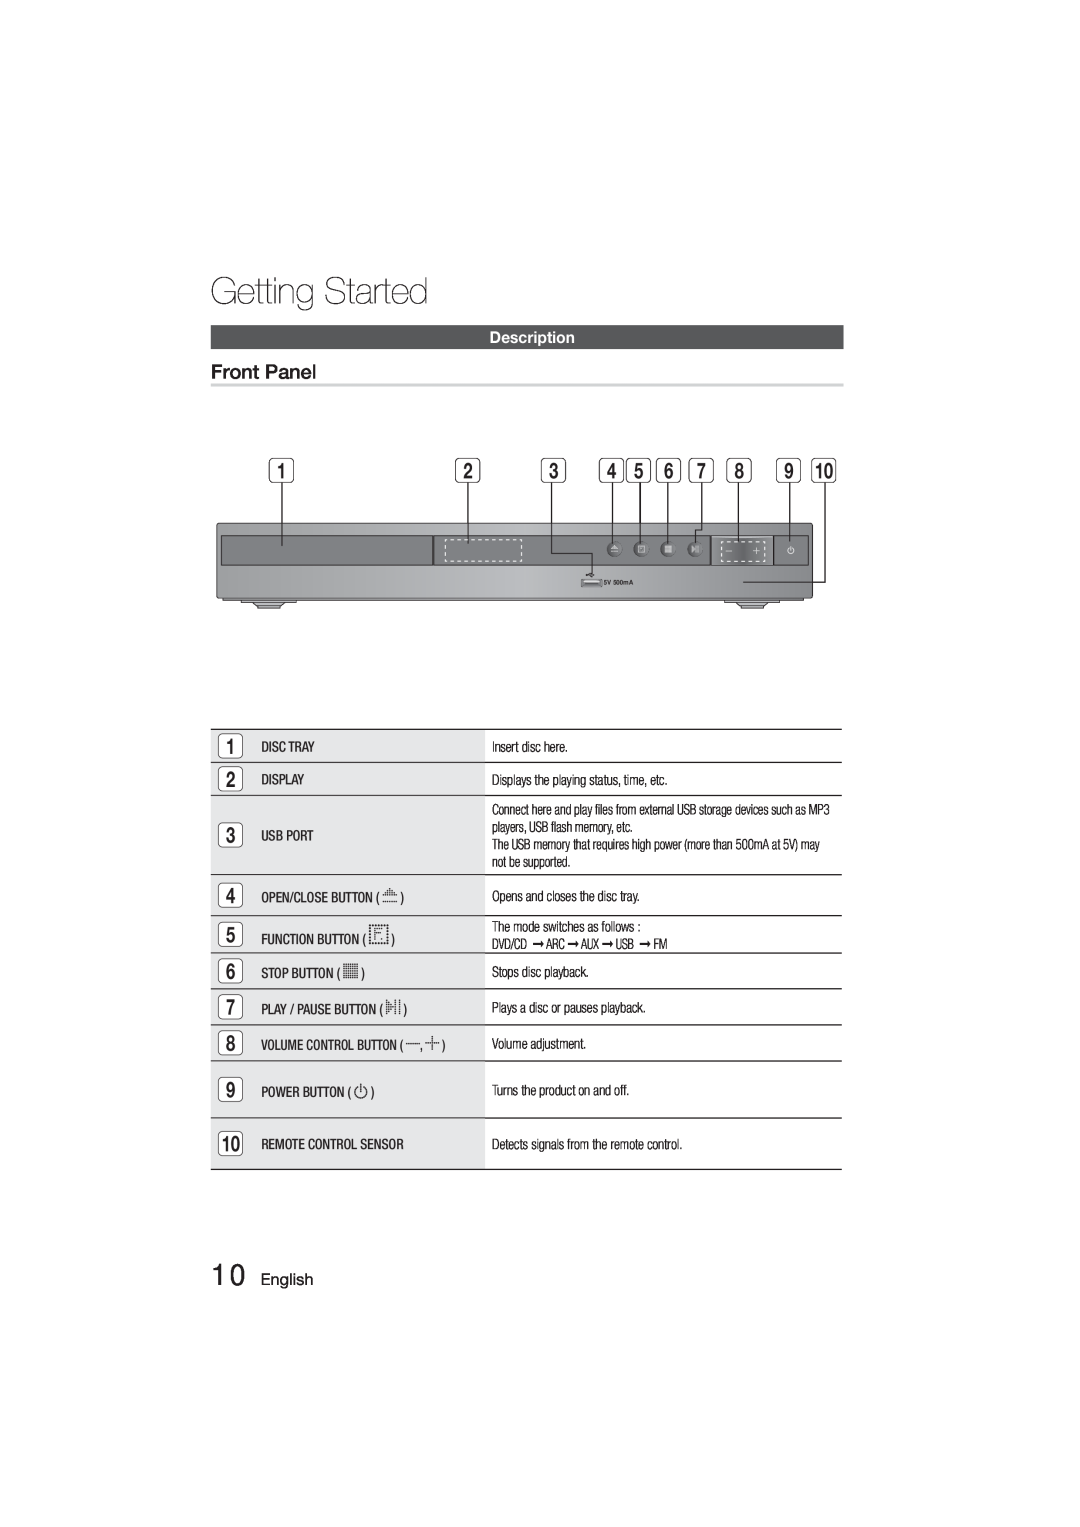 Samsung HT-E350, HT-355 user manual Front Panel, Description, English, Getting Started 